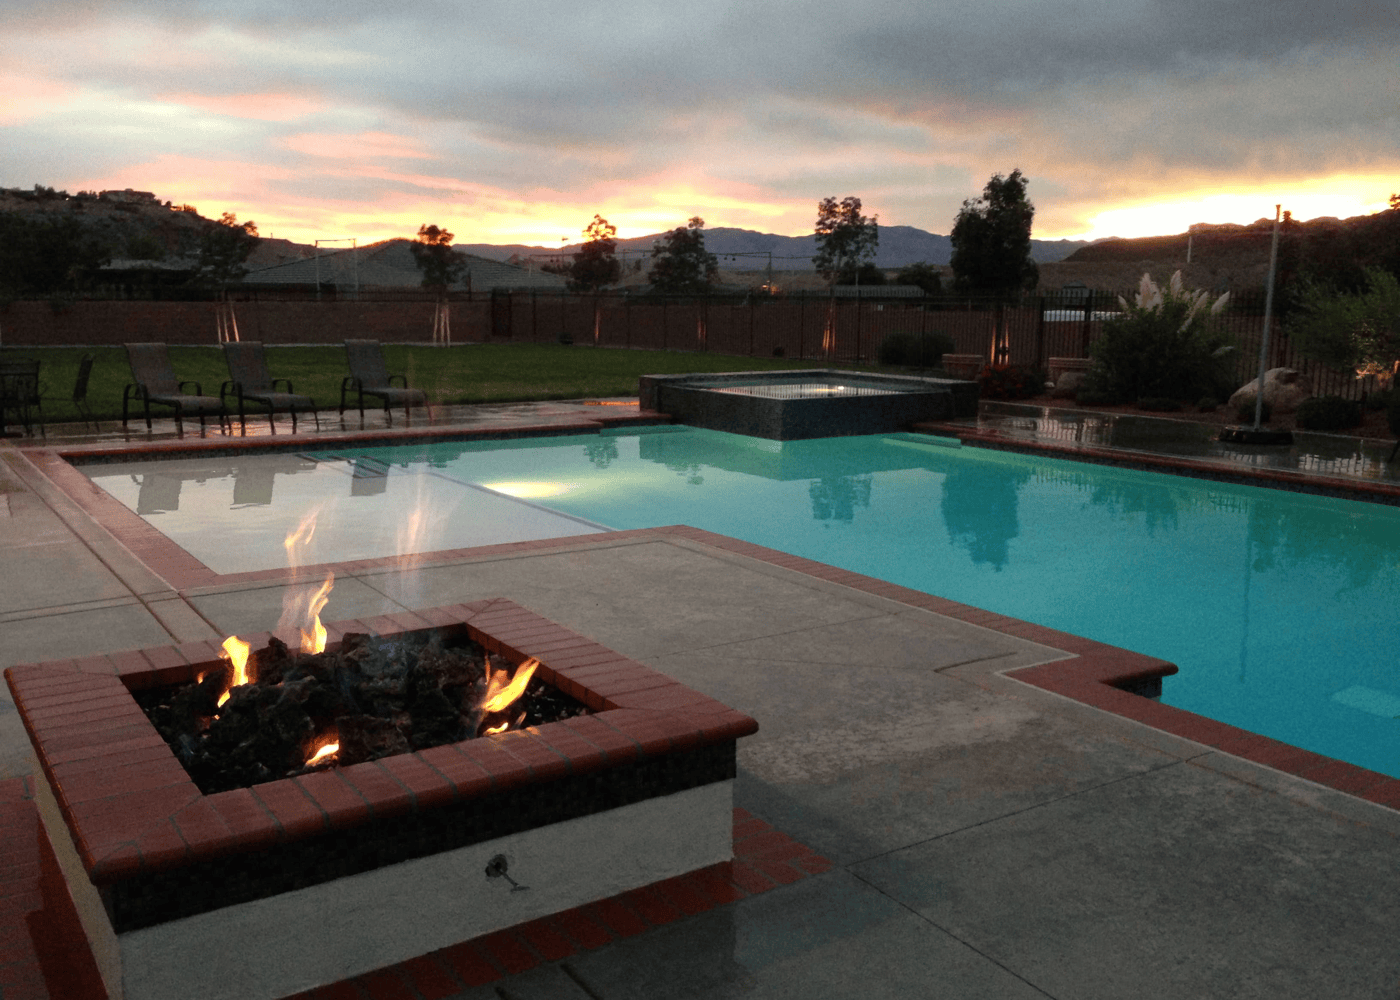 An aesthetic view of an in-ground swimming pool in the evening, with a firepit in the foreground and the rest of the backyard in the background. The pool is illuminated, casting a gentle glow on the water's surface with the pool's lights.